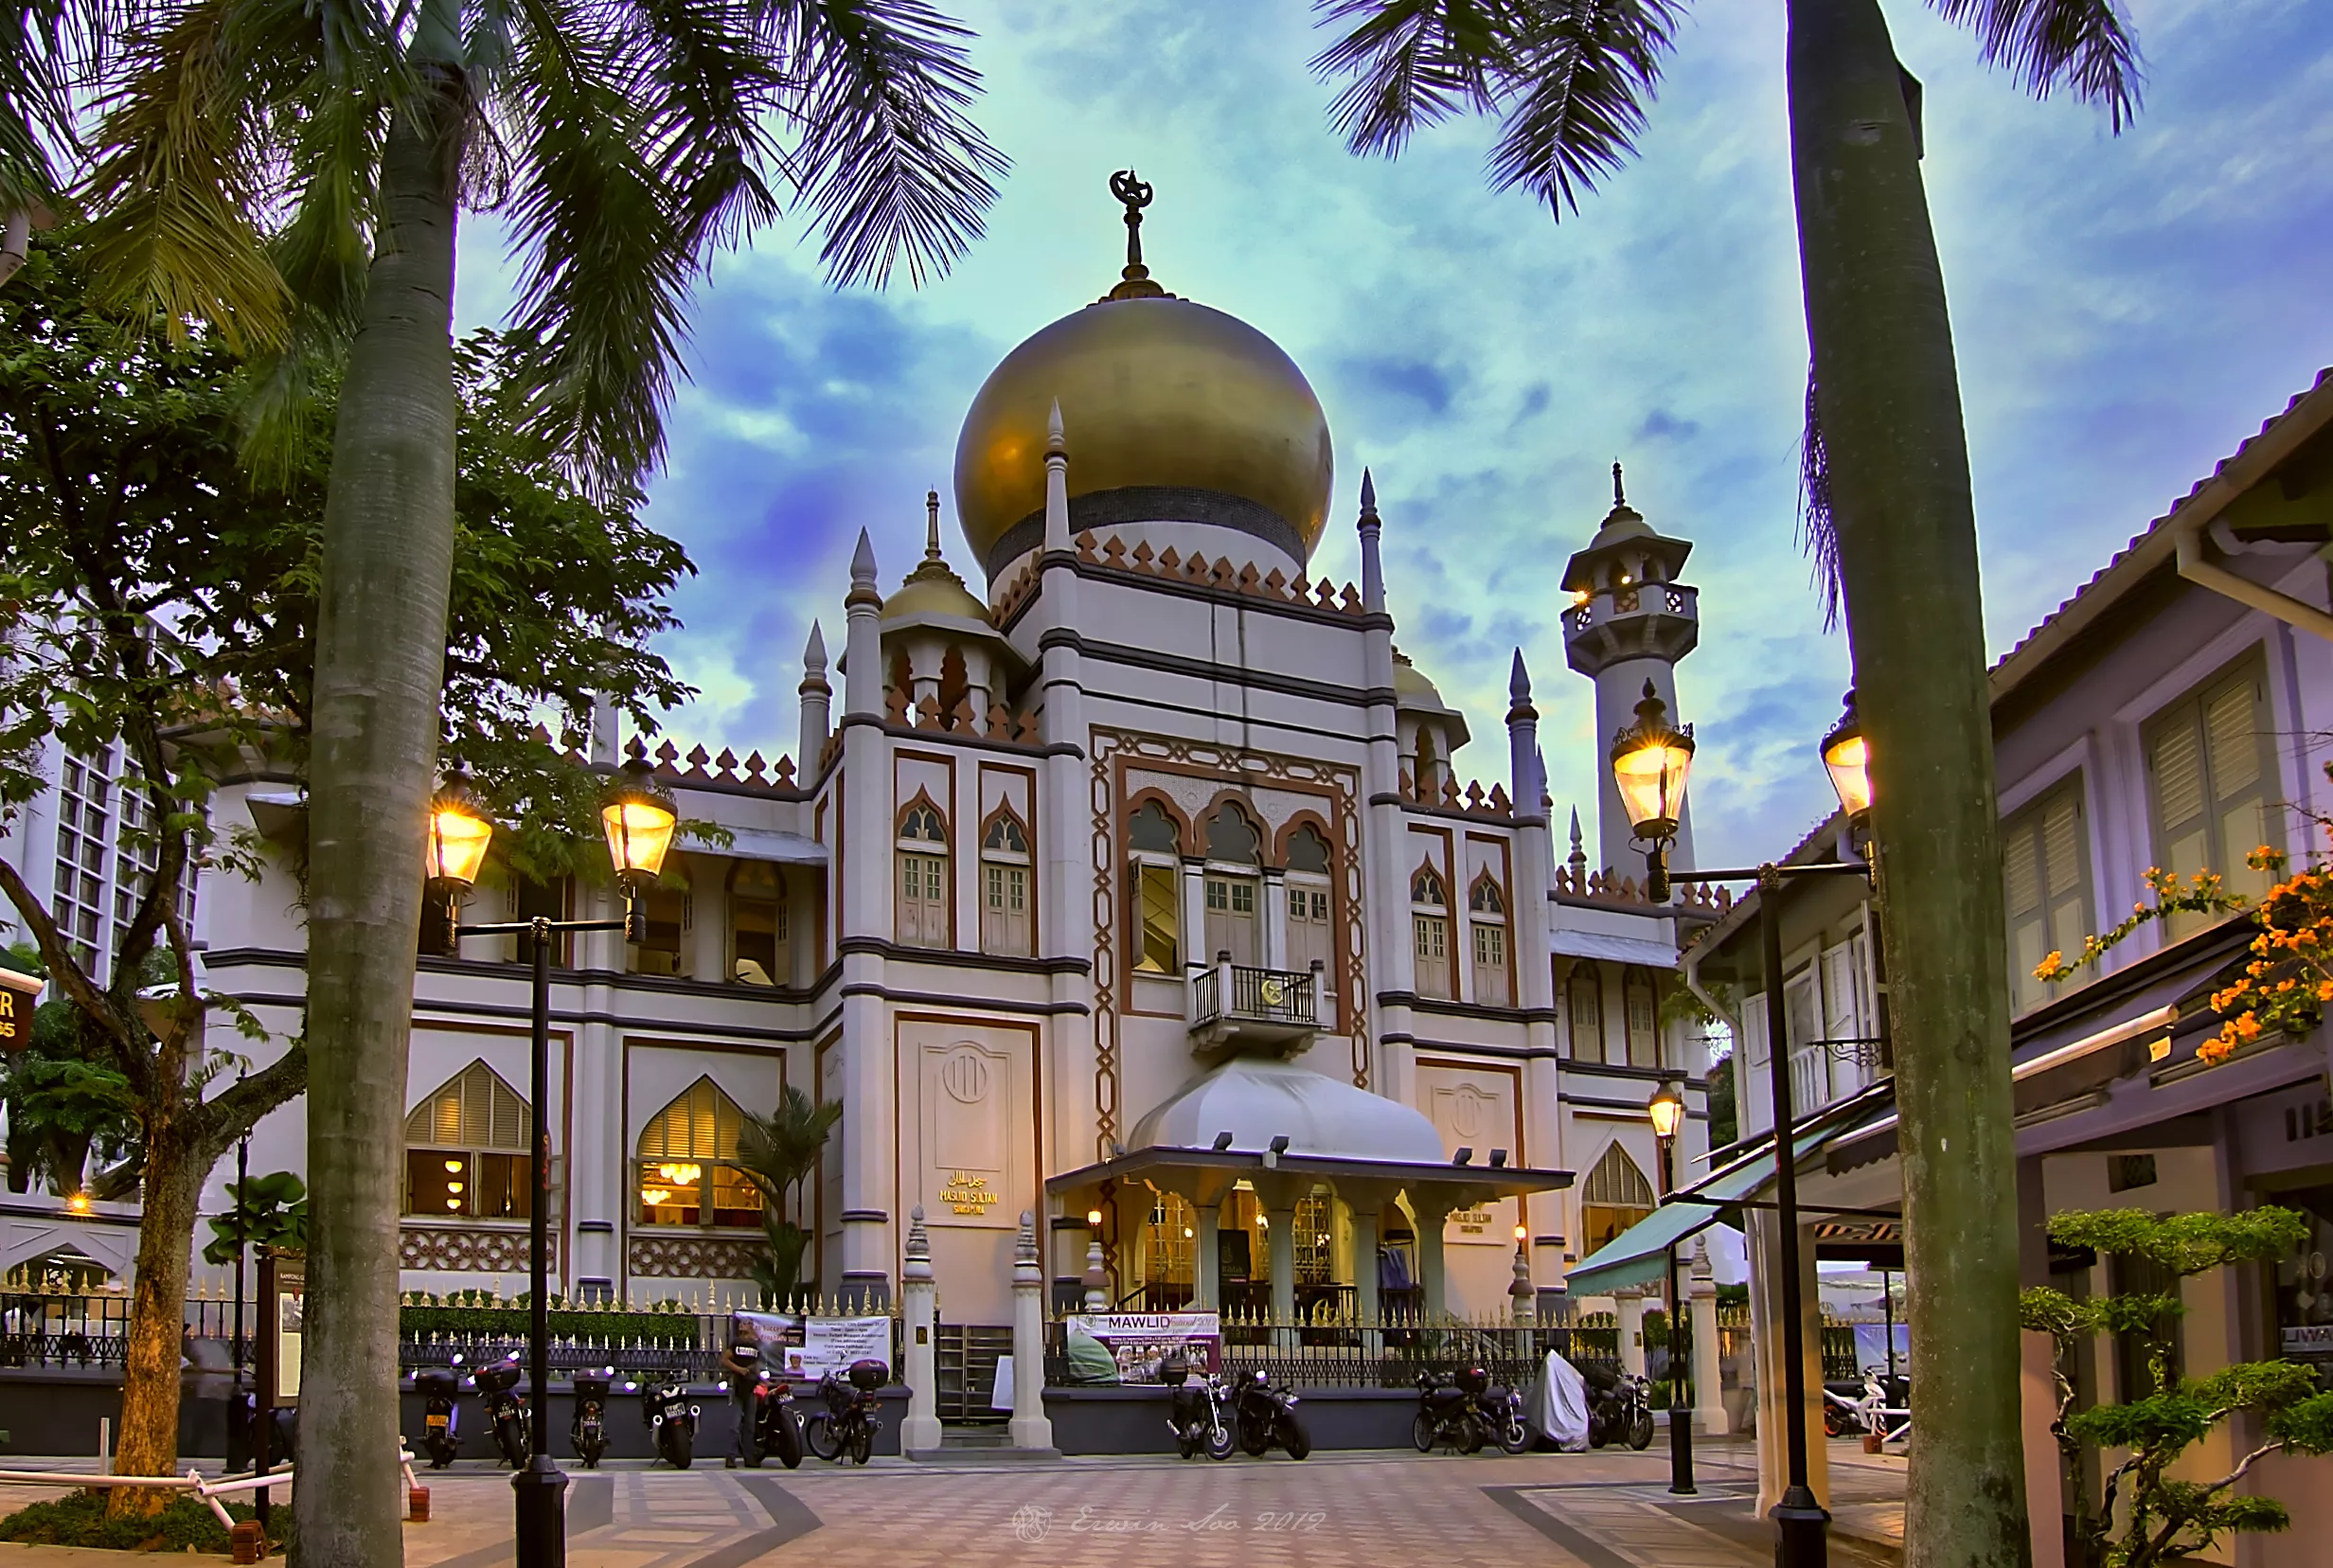 Sultan Hussein Mosque in Singapore, Central Asia | Architecture - Rated 3.9